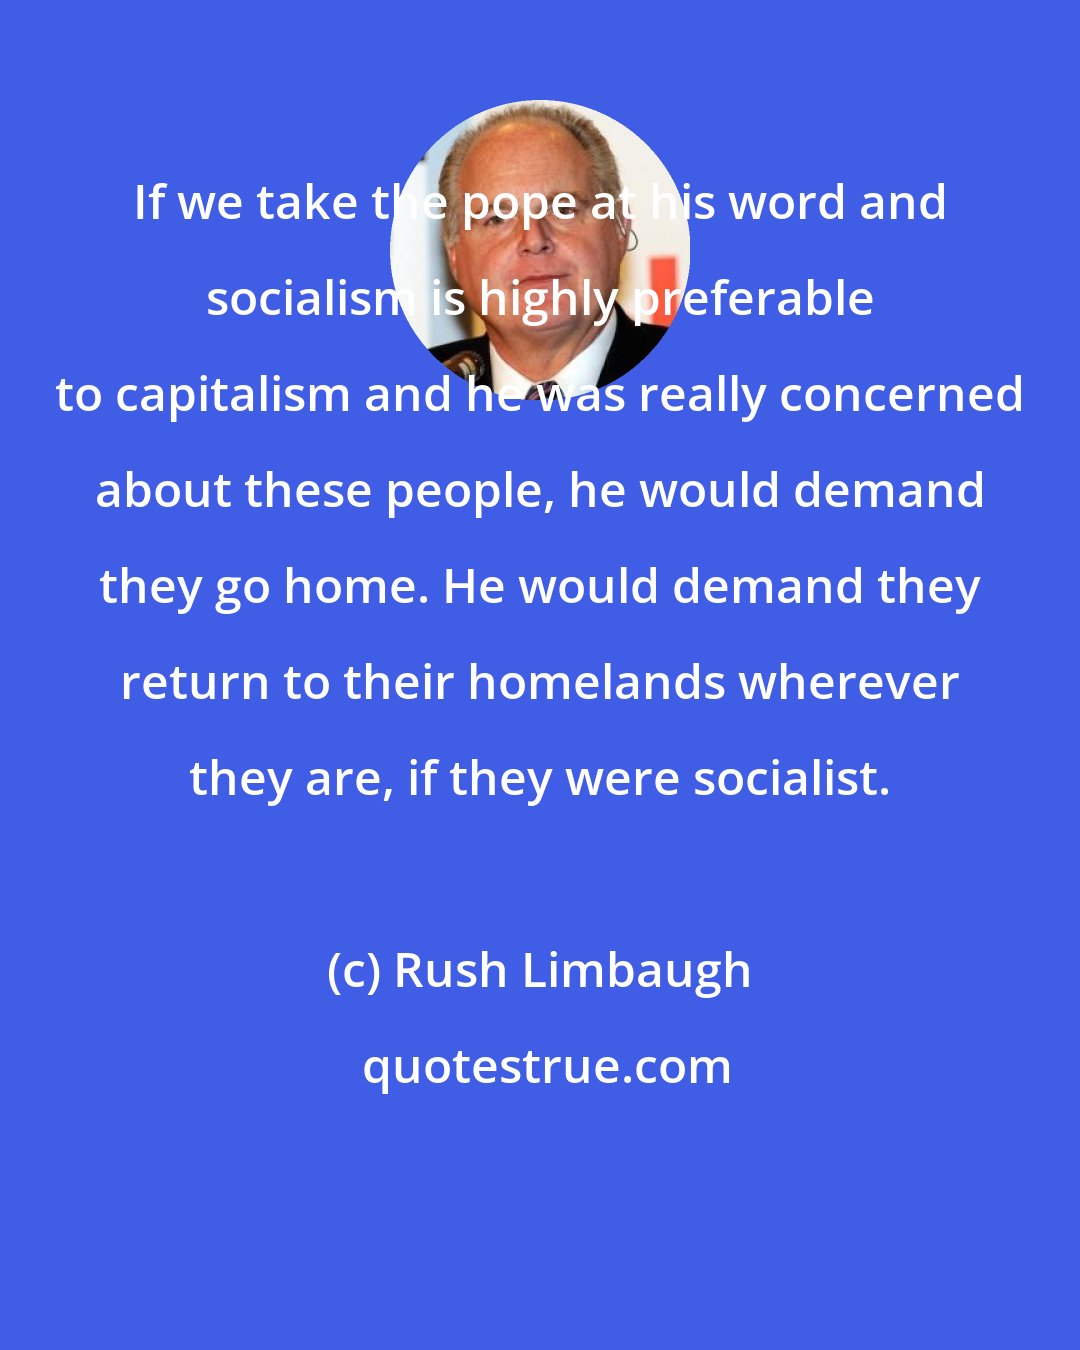 Rush Limbaugh: If we take the pope at his word and socialism is highly preferable to capitalism and he was really concerned about these people, he would demand they go home. He would demand they return to their homelands wherever they are, if they were socialist.